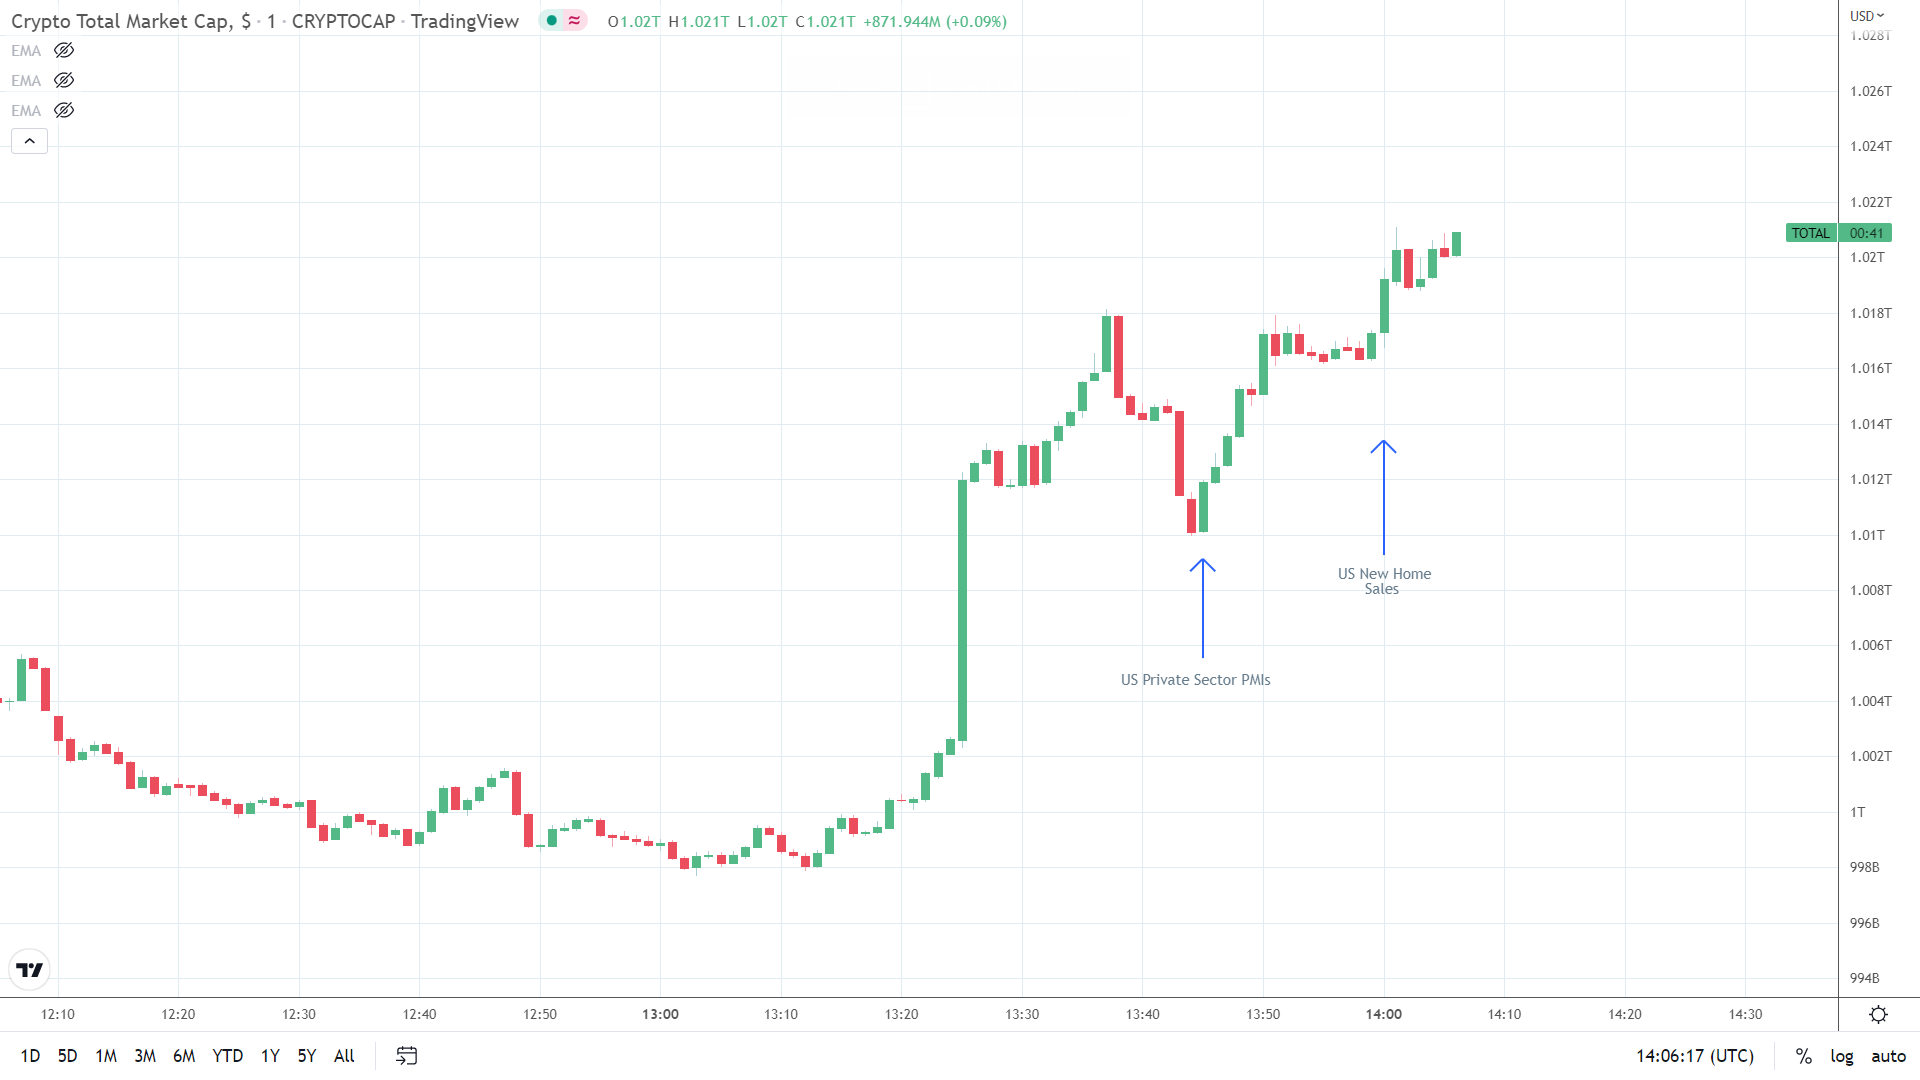 Crypto reaction to PMIs and Housing Sector Numbers